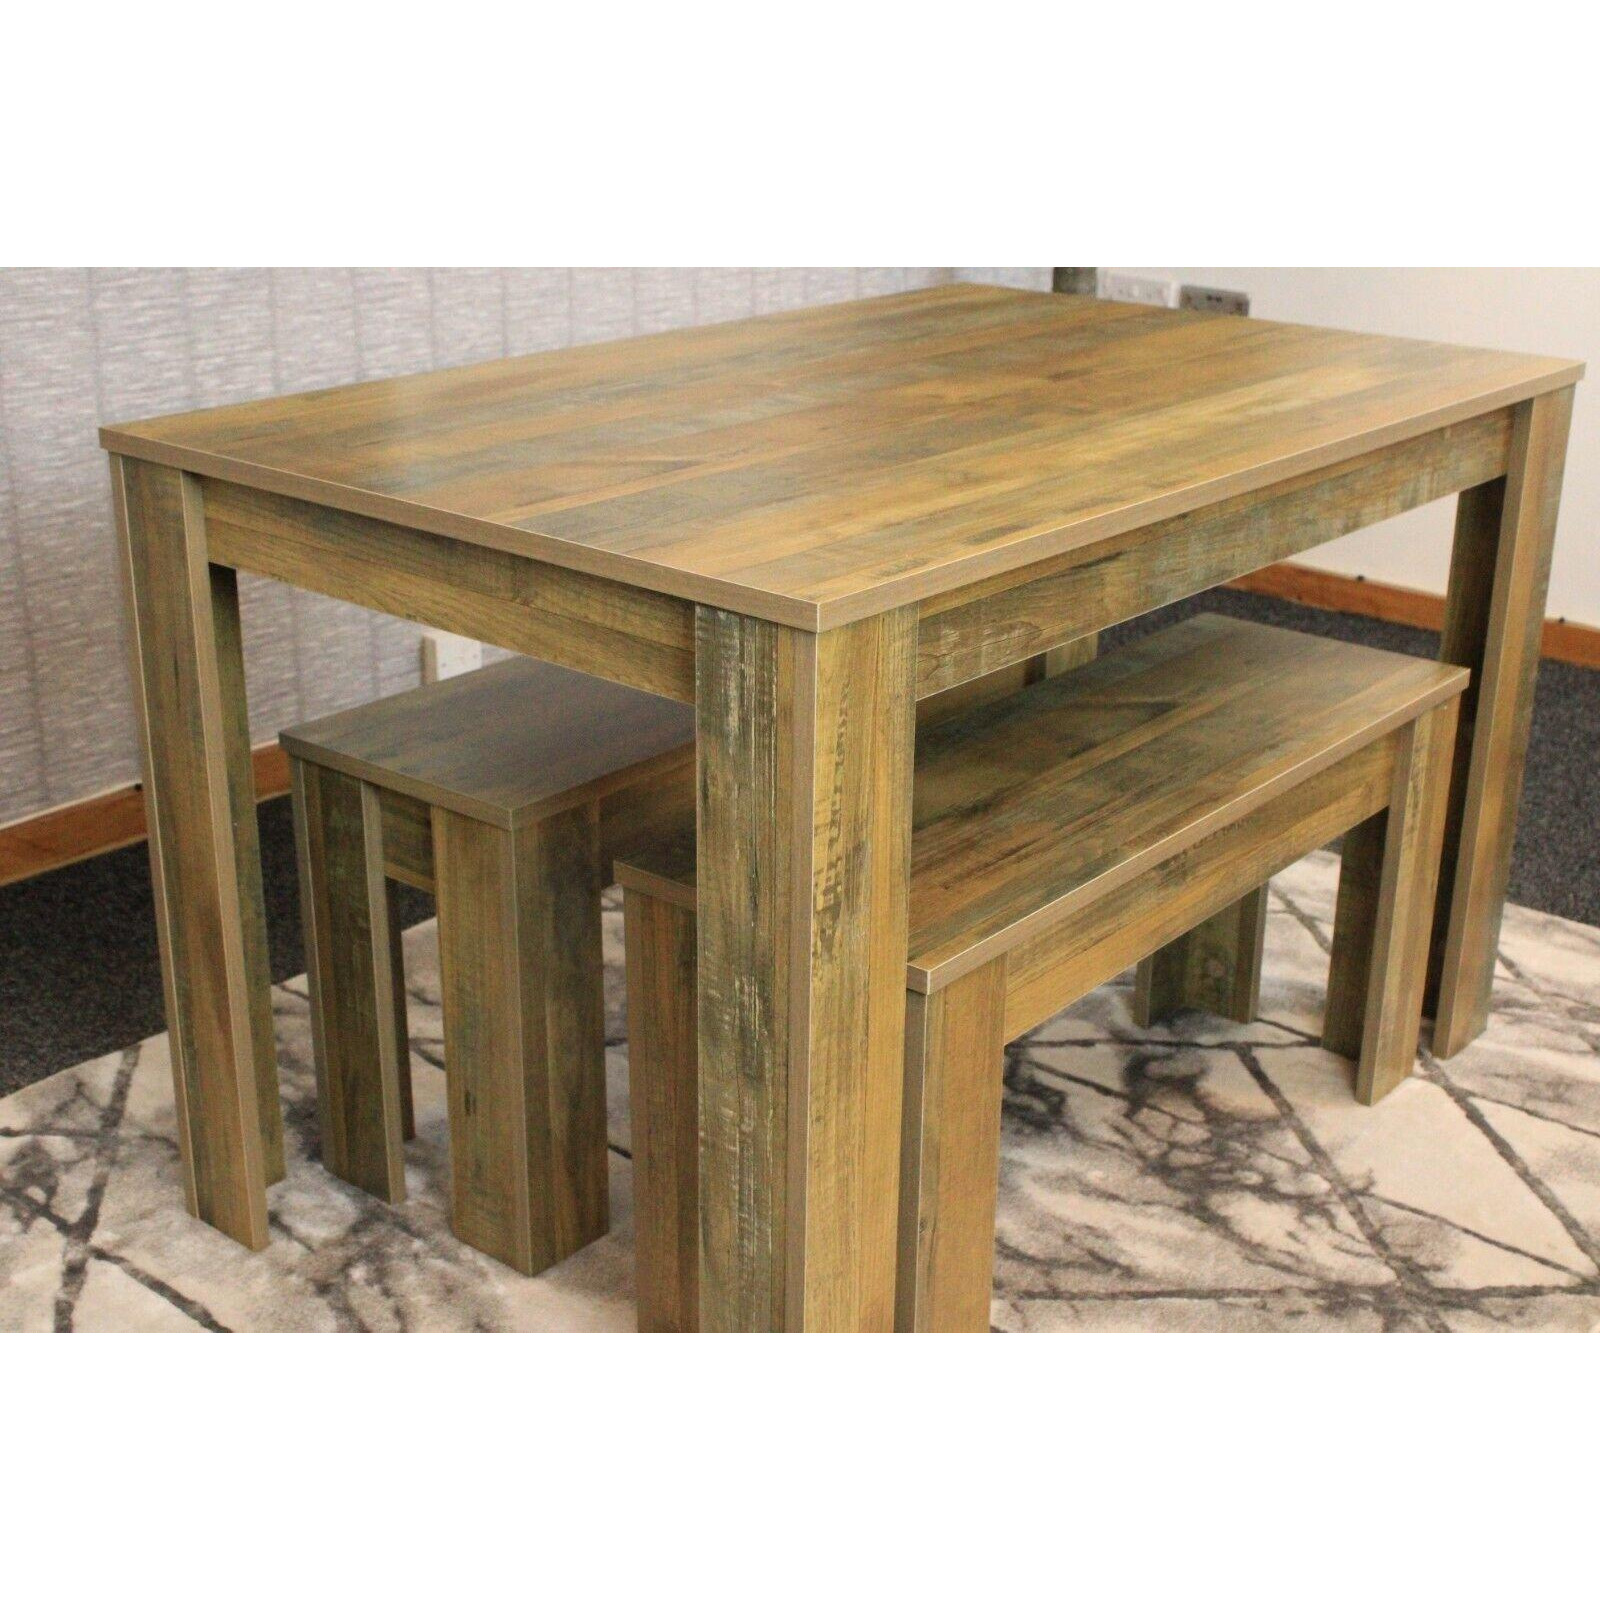 Wooden Dining Table And 2 Benches kitchen table Set space saver - image 1